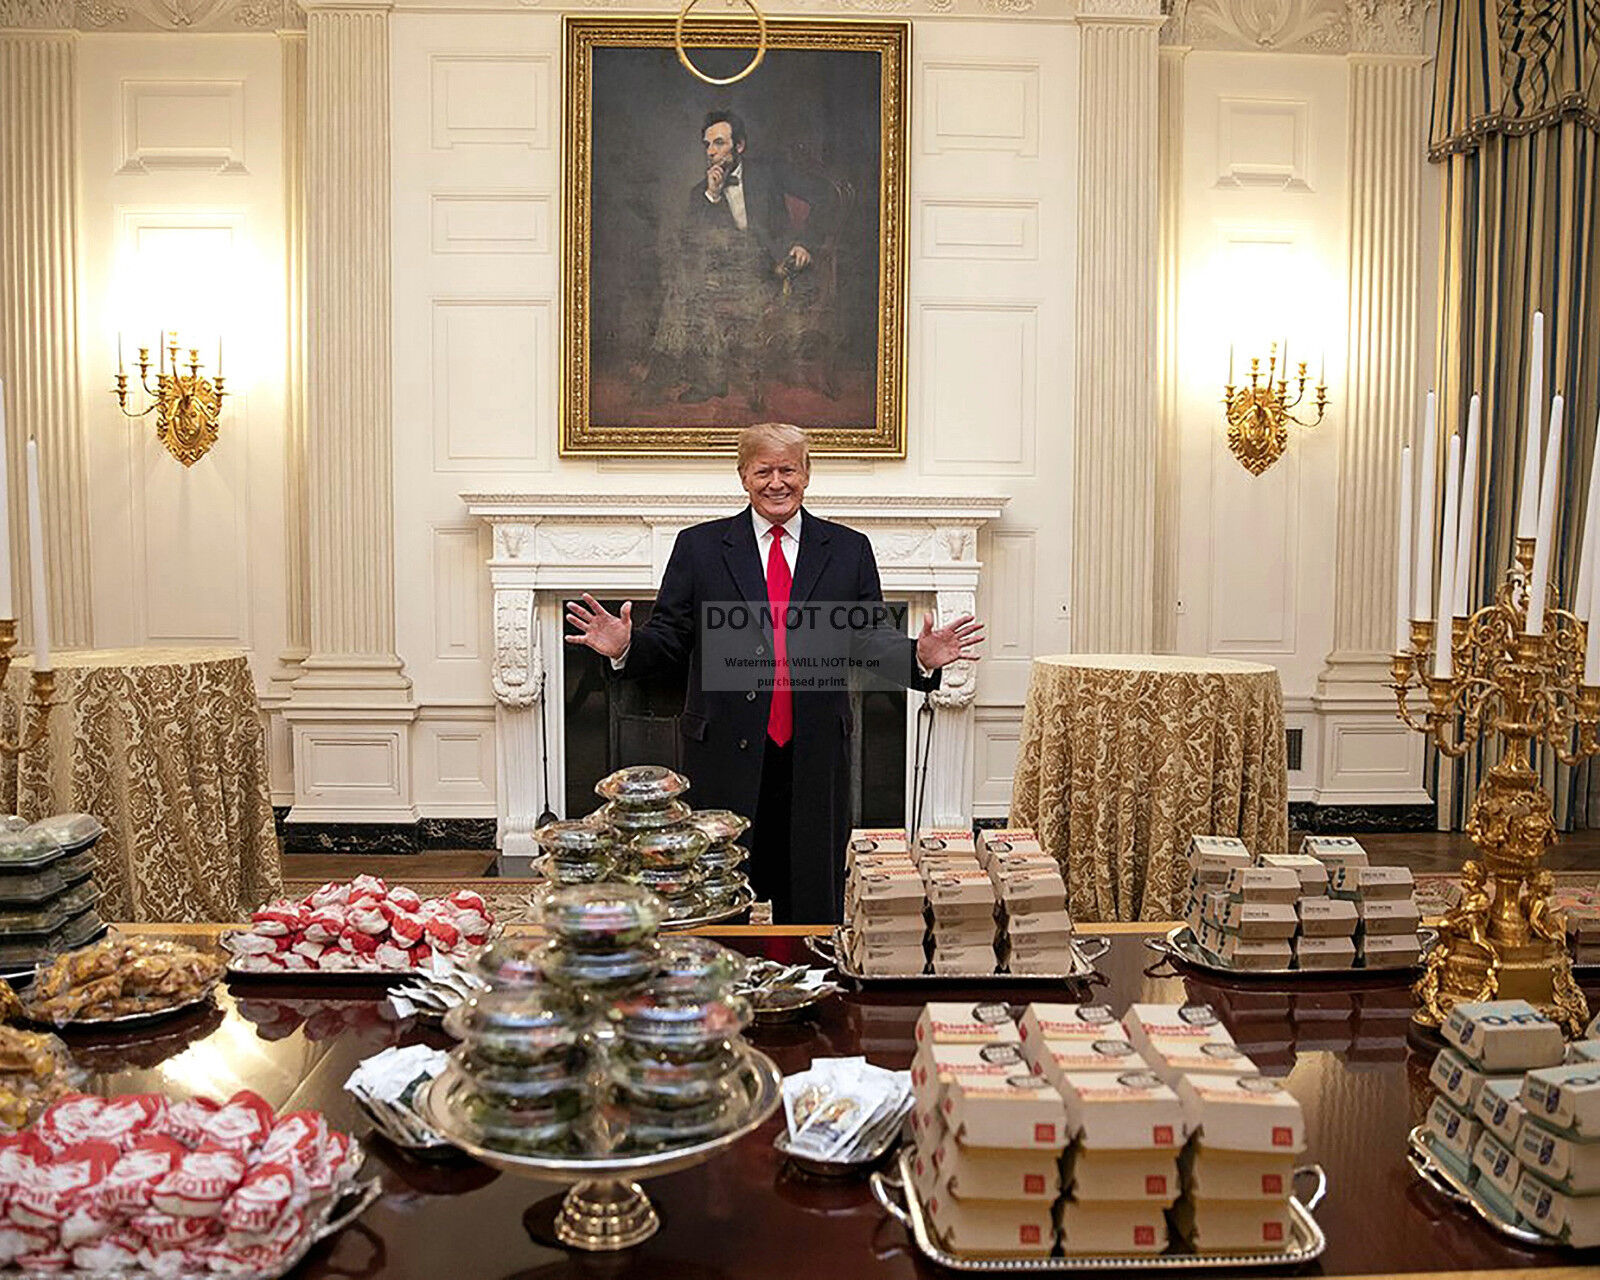 DONALD TRUMP w/ FAST FOOD FOR THE 2018 CLEMSON FOOTBALL TEAM  8X10 PHOTO (RT651)